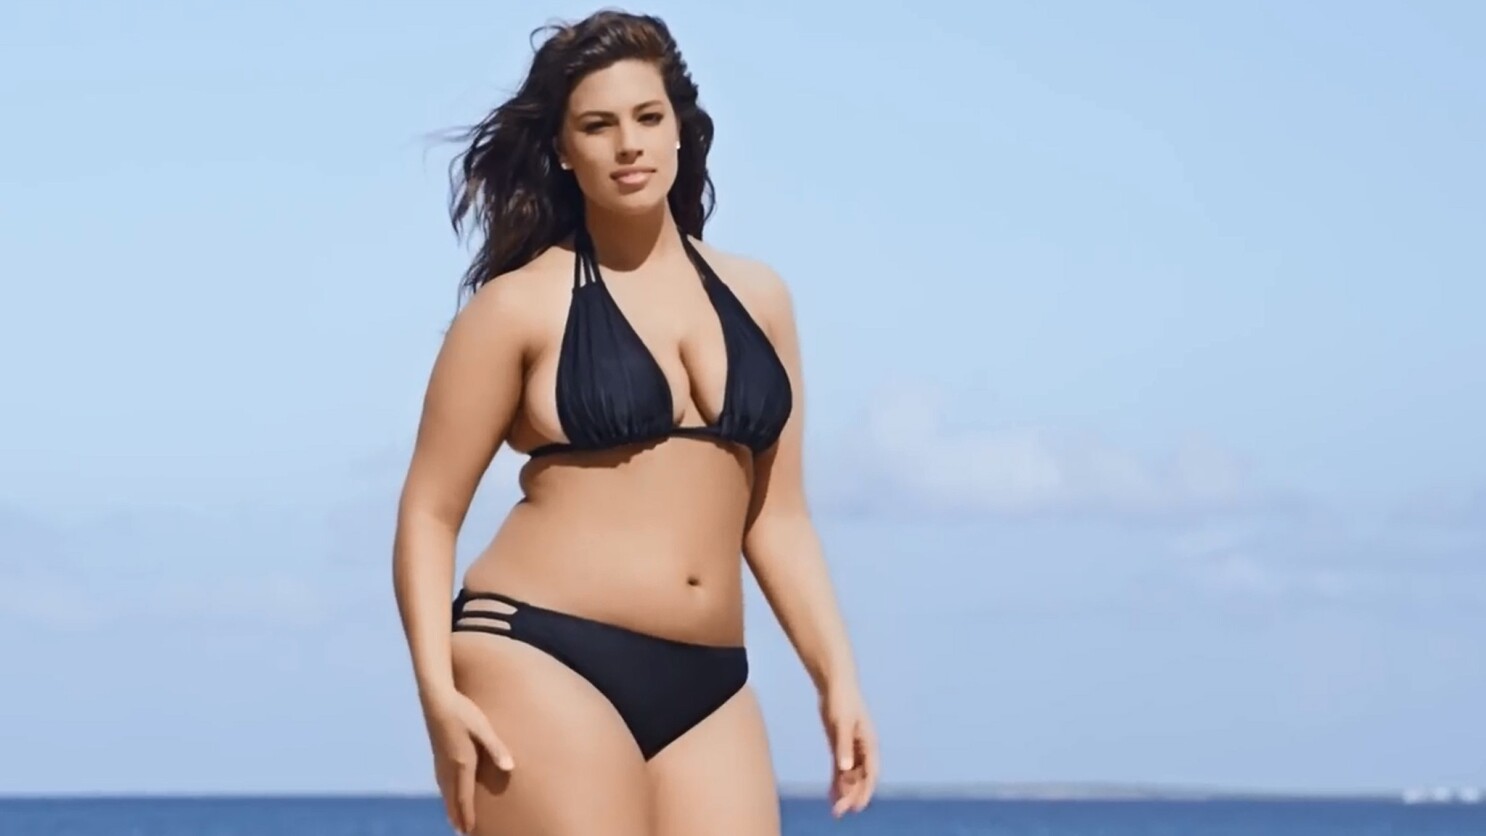 Plus-size model Ashley lands SI swimsuit-issue ad for curvy women - Angeles Times